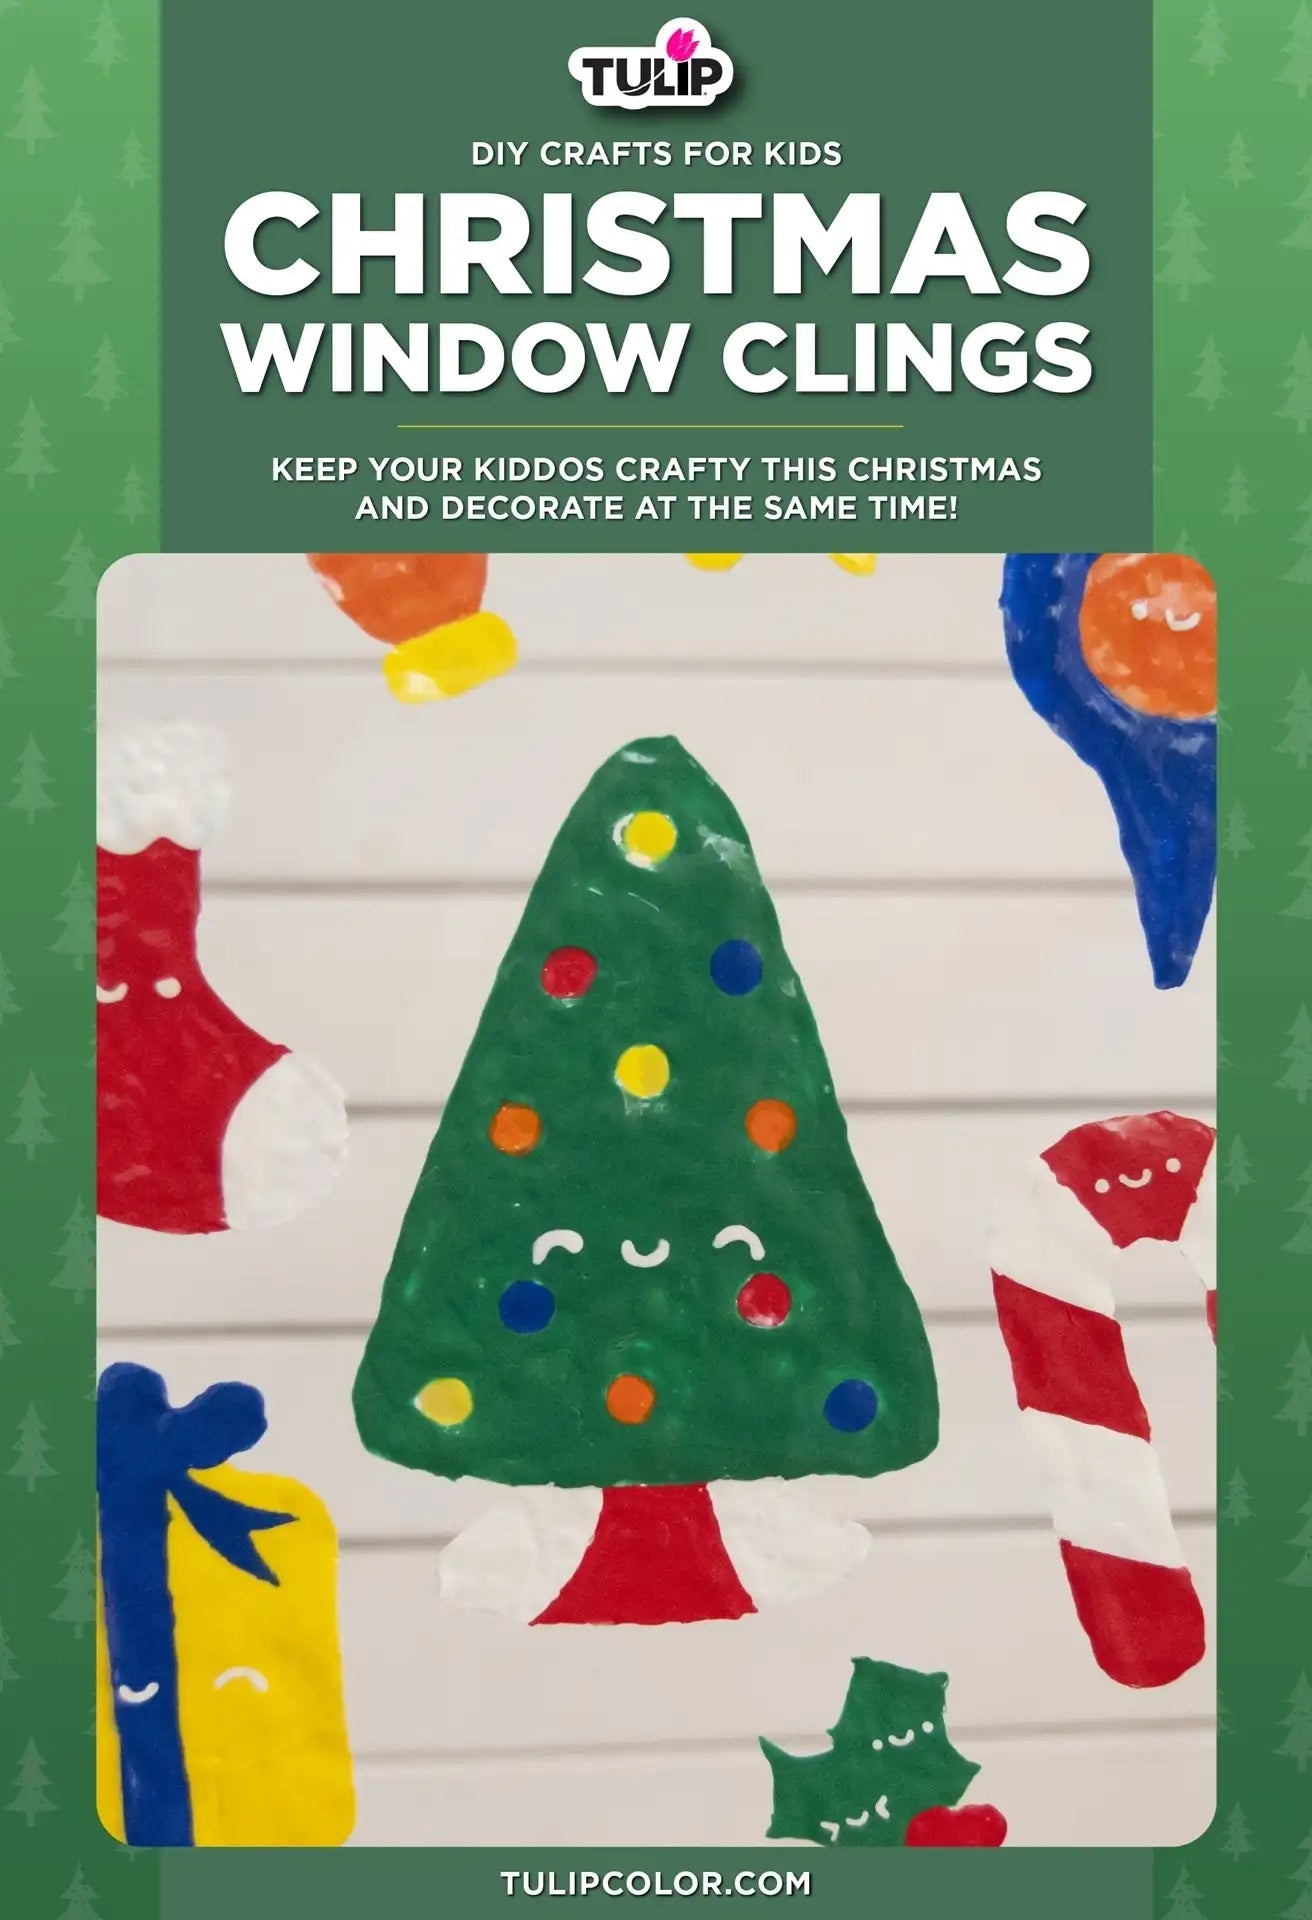 DIY Christmas Craft for Kids: Window Clings